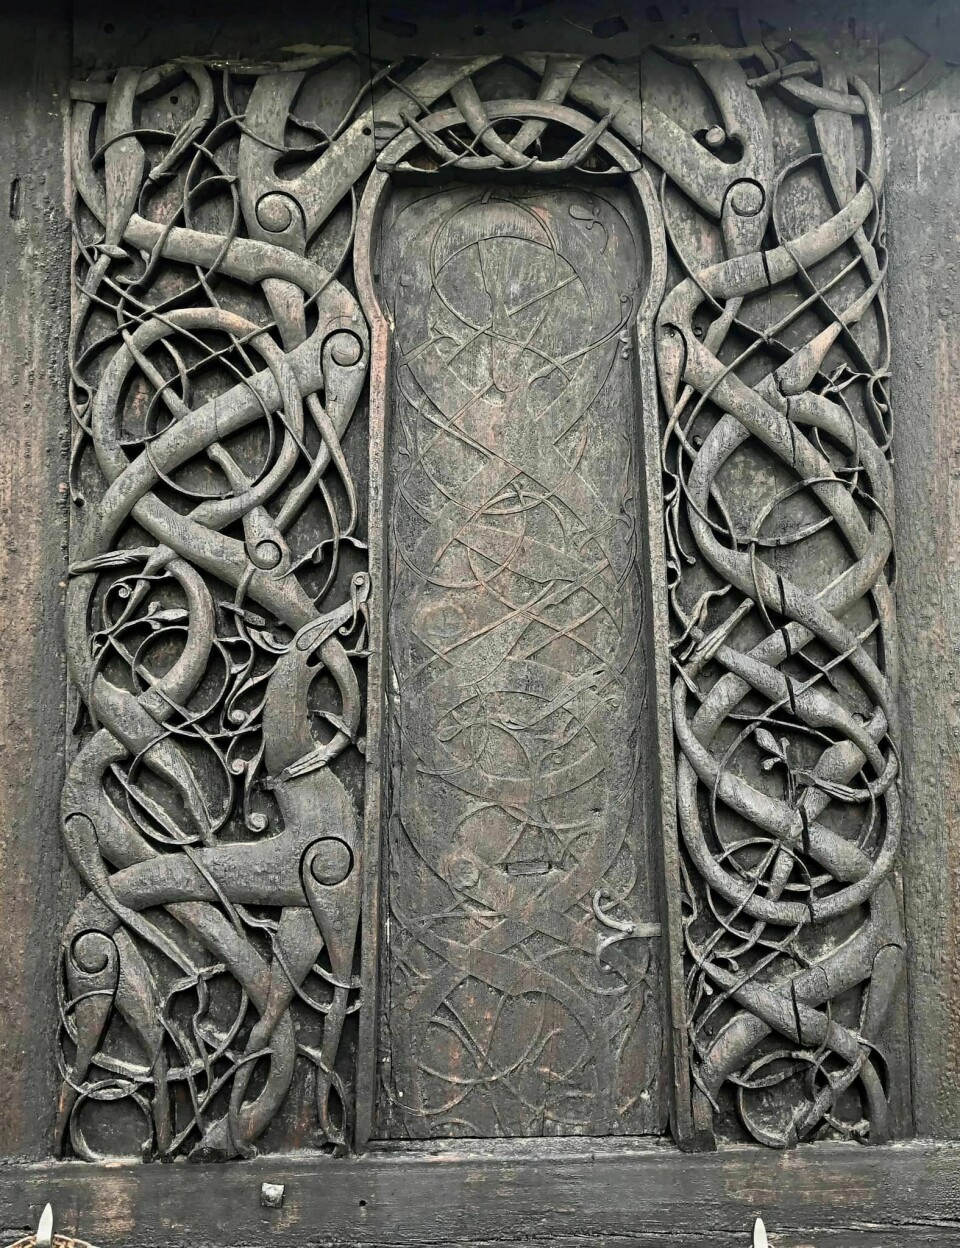 The north portal of the Urnes stave church features the classic Urnes motif with the Urnes beast.